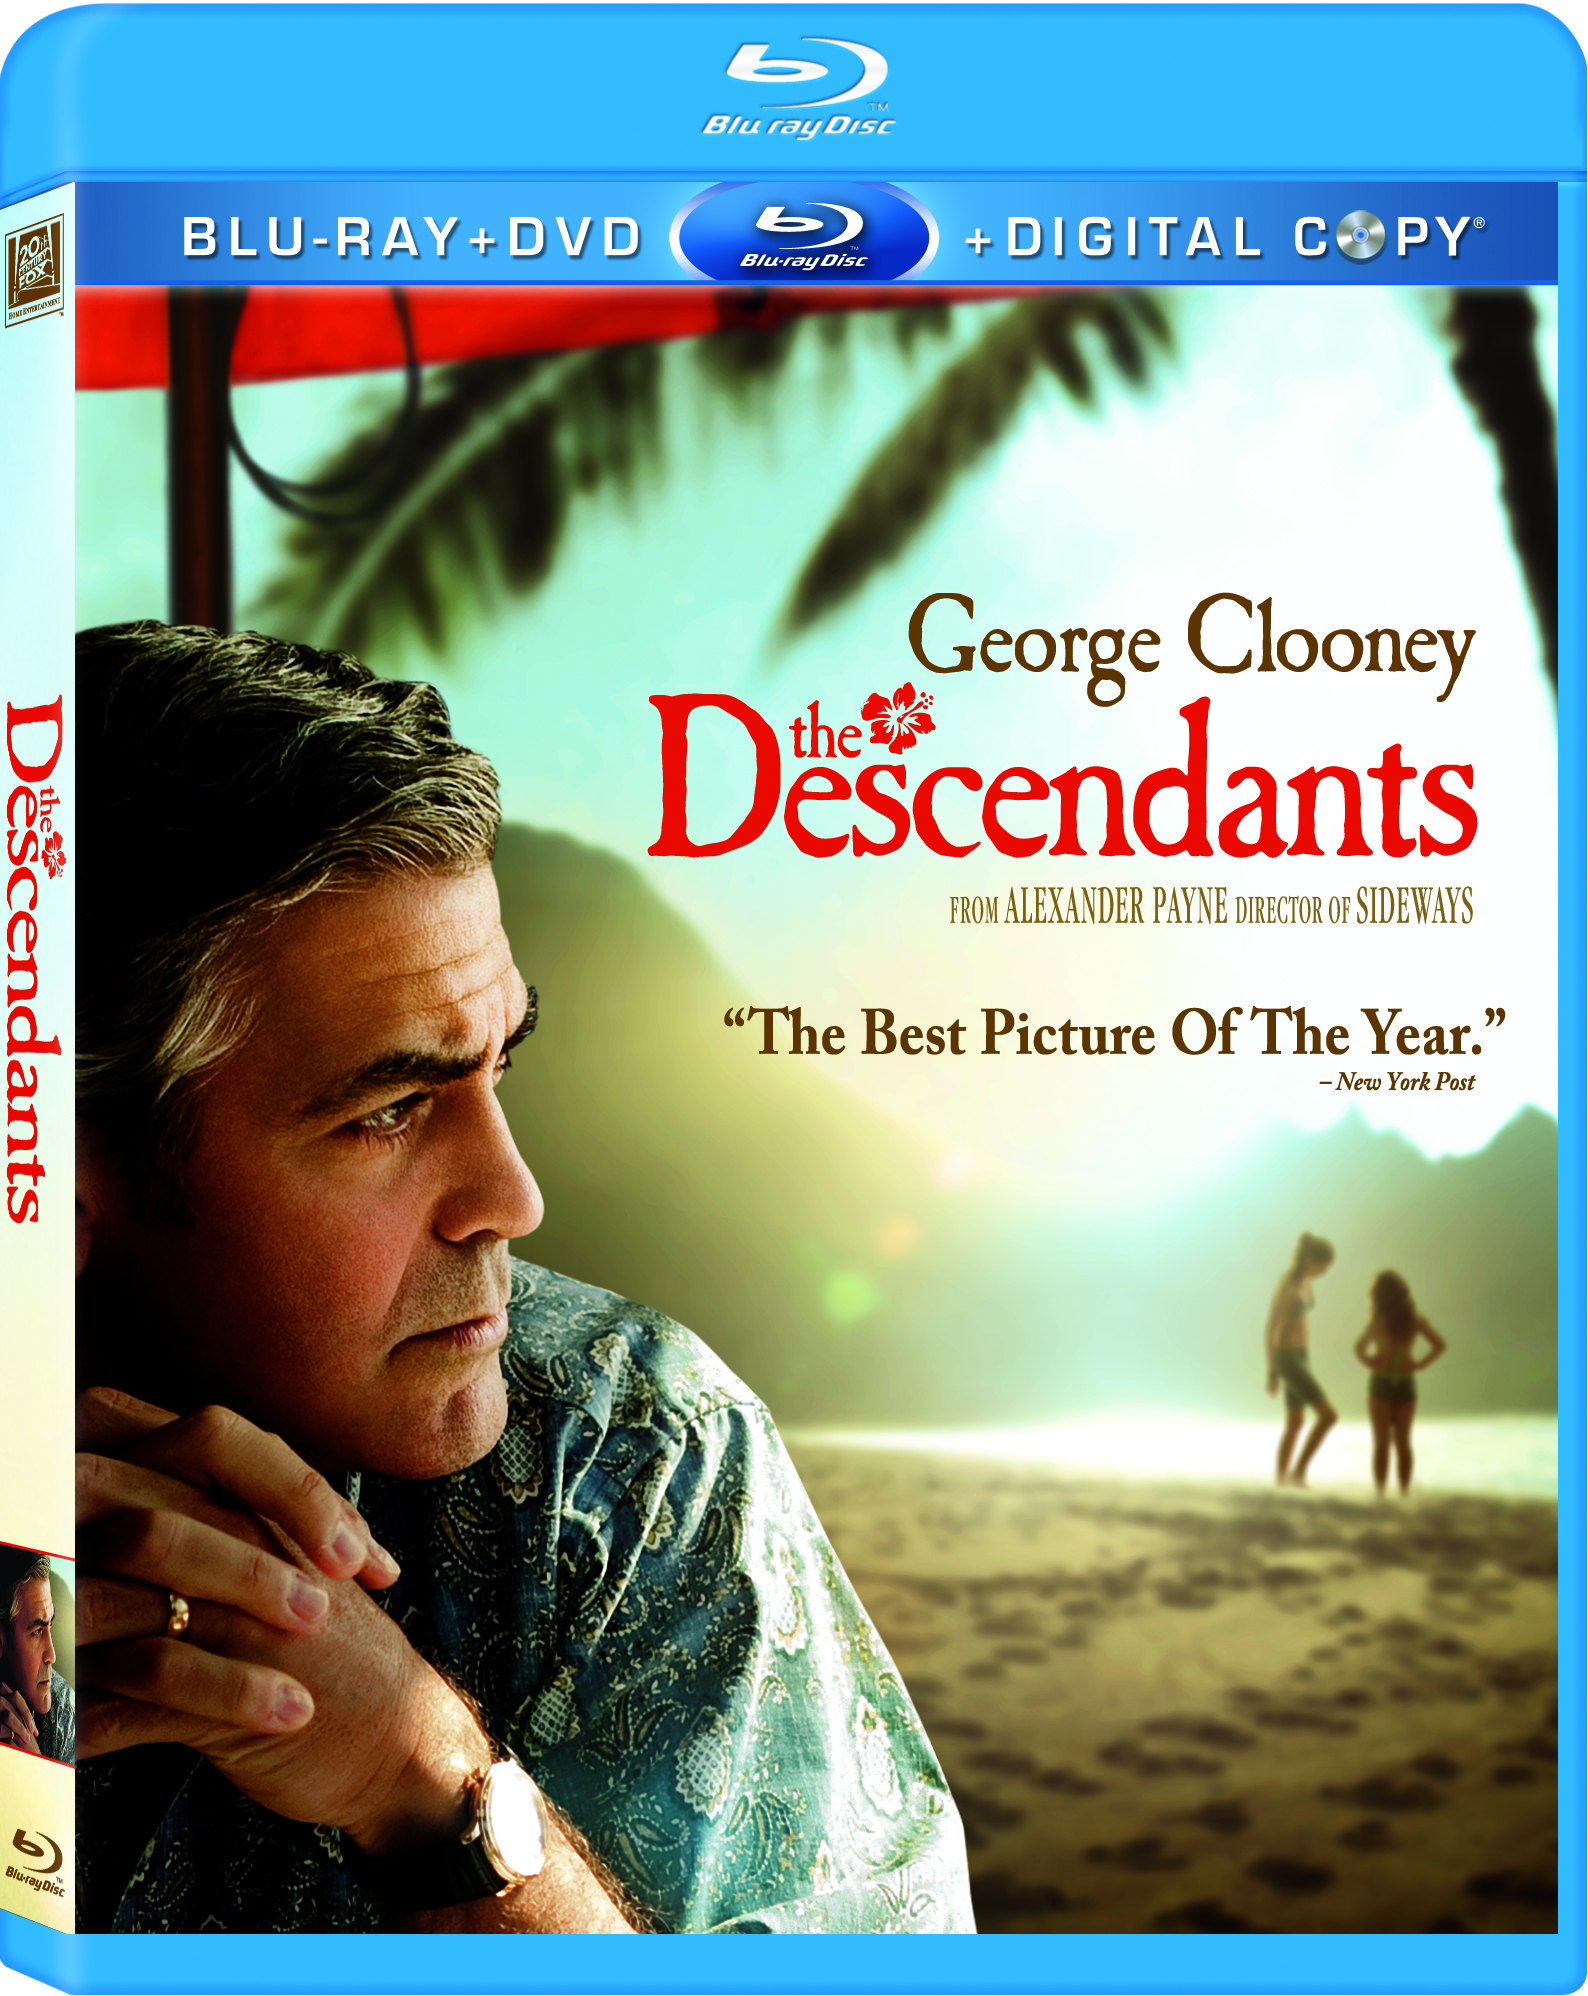 Pick of the Week: The Descendants Available on Blu-ray/ DVD March 13th